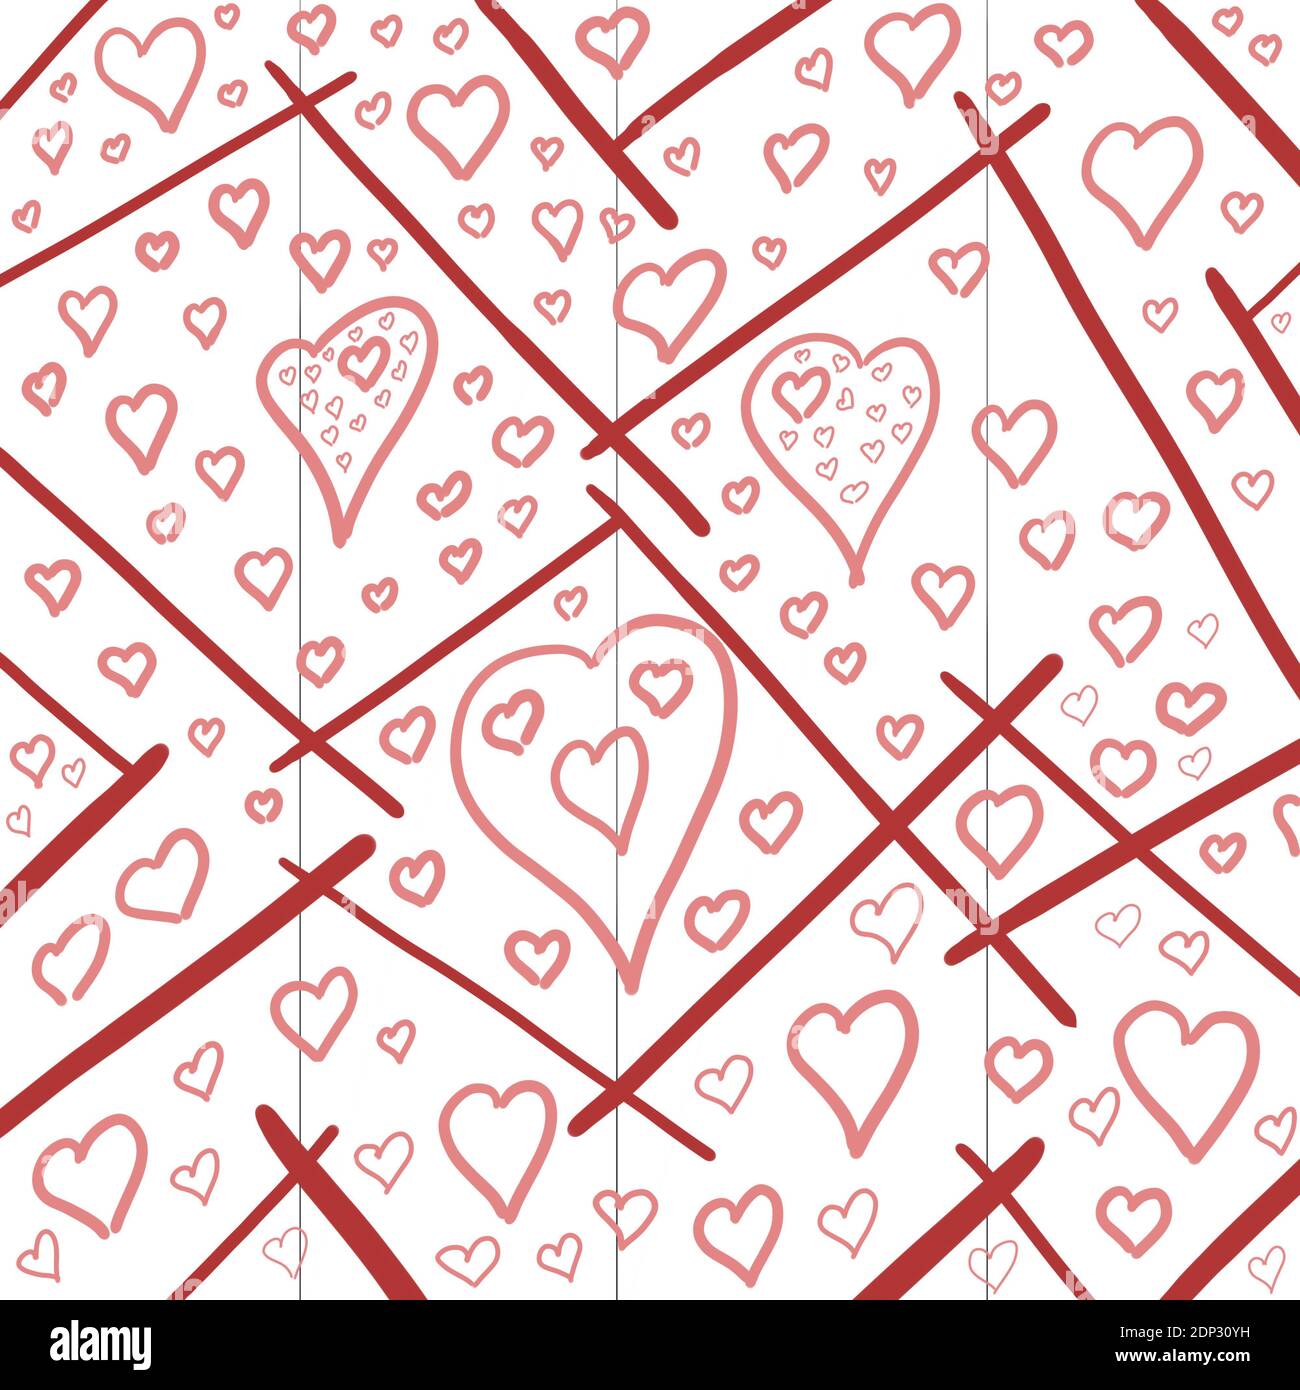 Red hearts handdrawing separated with red lines saint Valentine Stock Photo